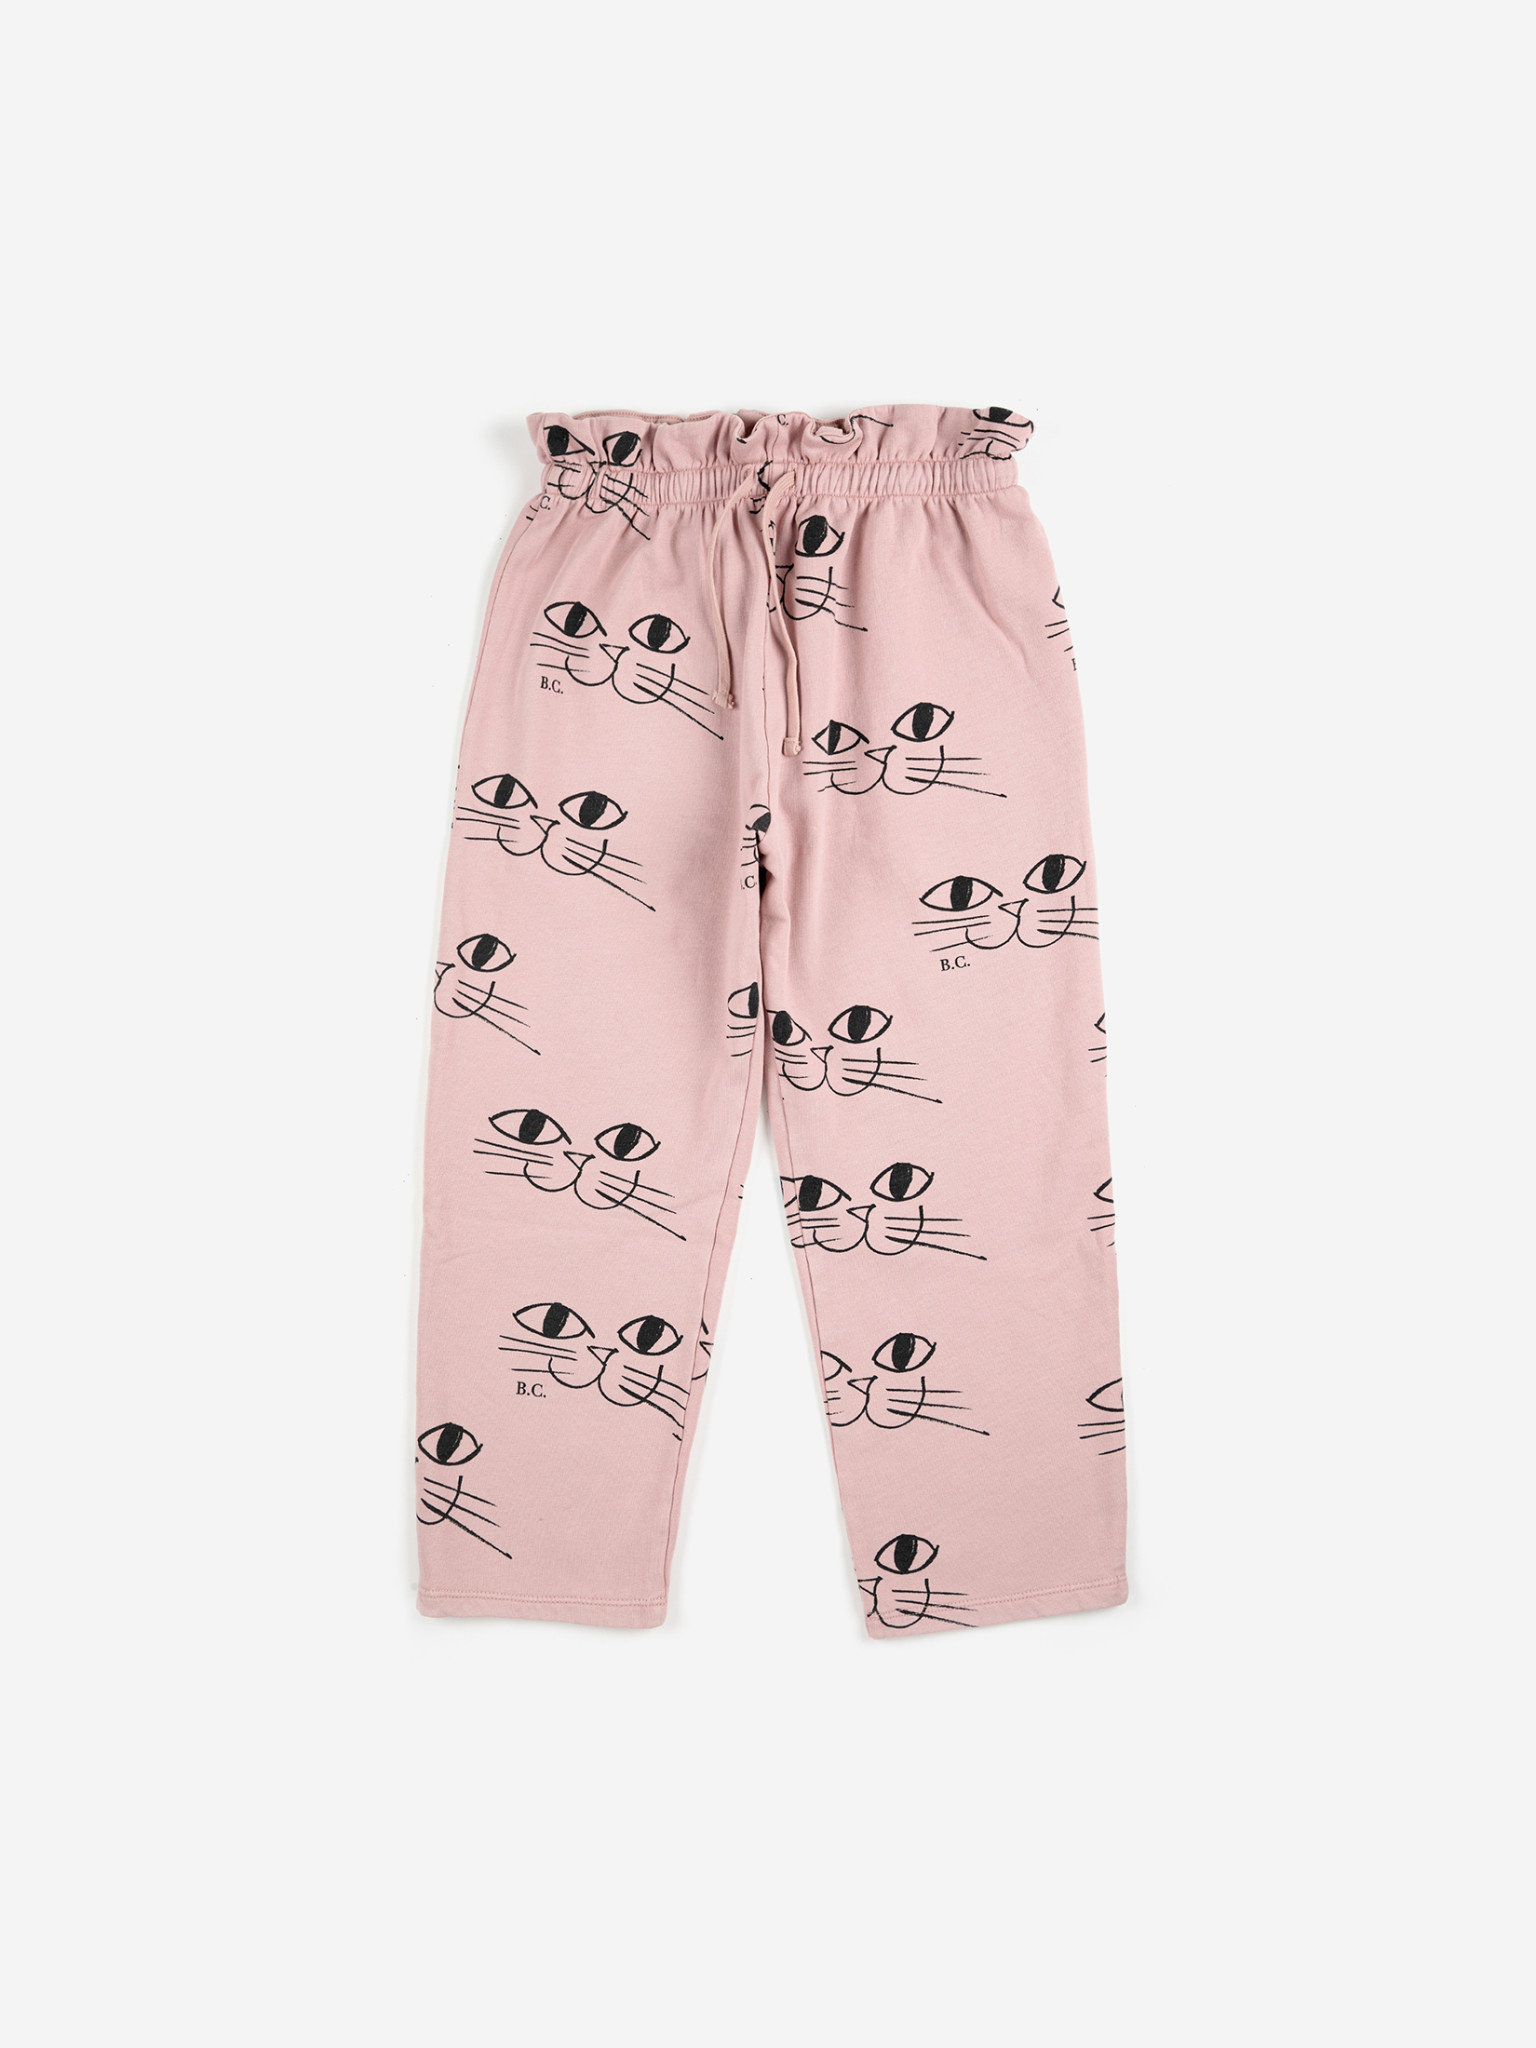 BOBO CHOSES Smiling Cat All Over Jogging Pants - The Spotted Goose